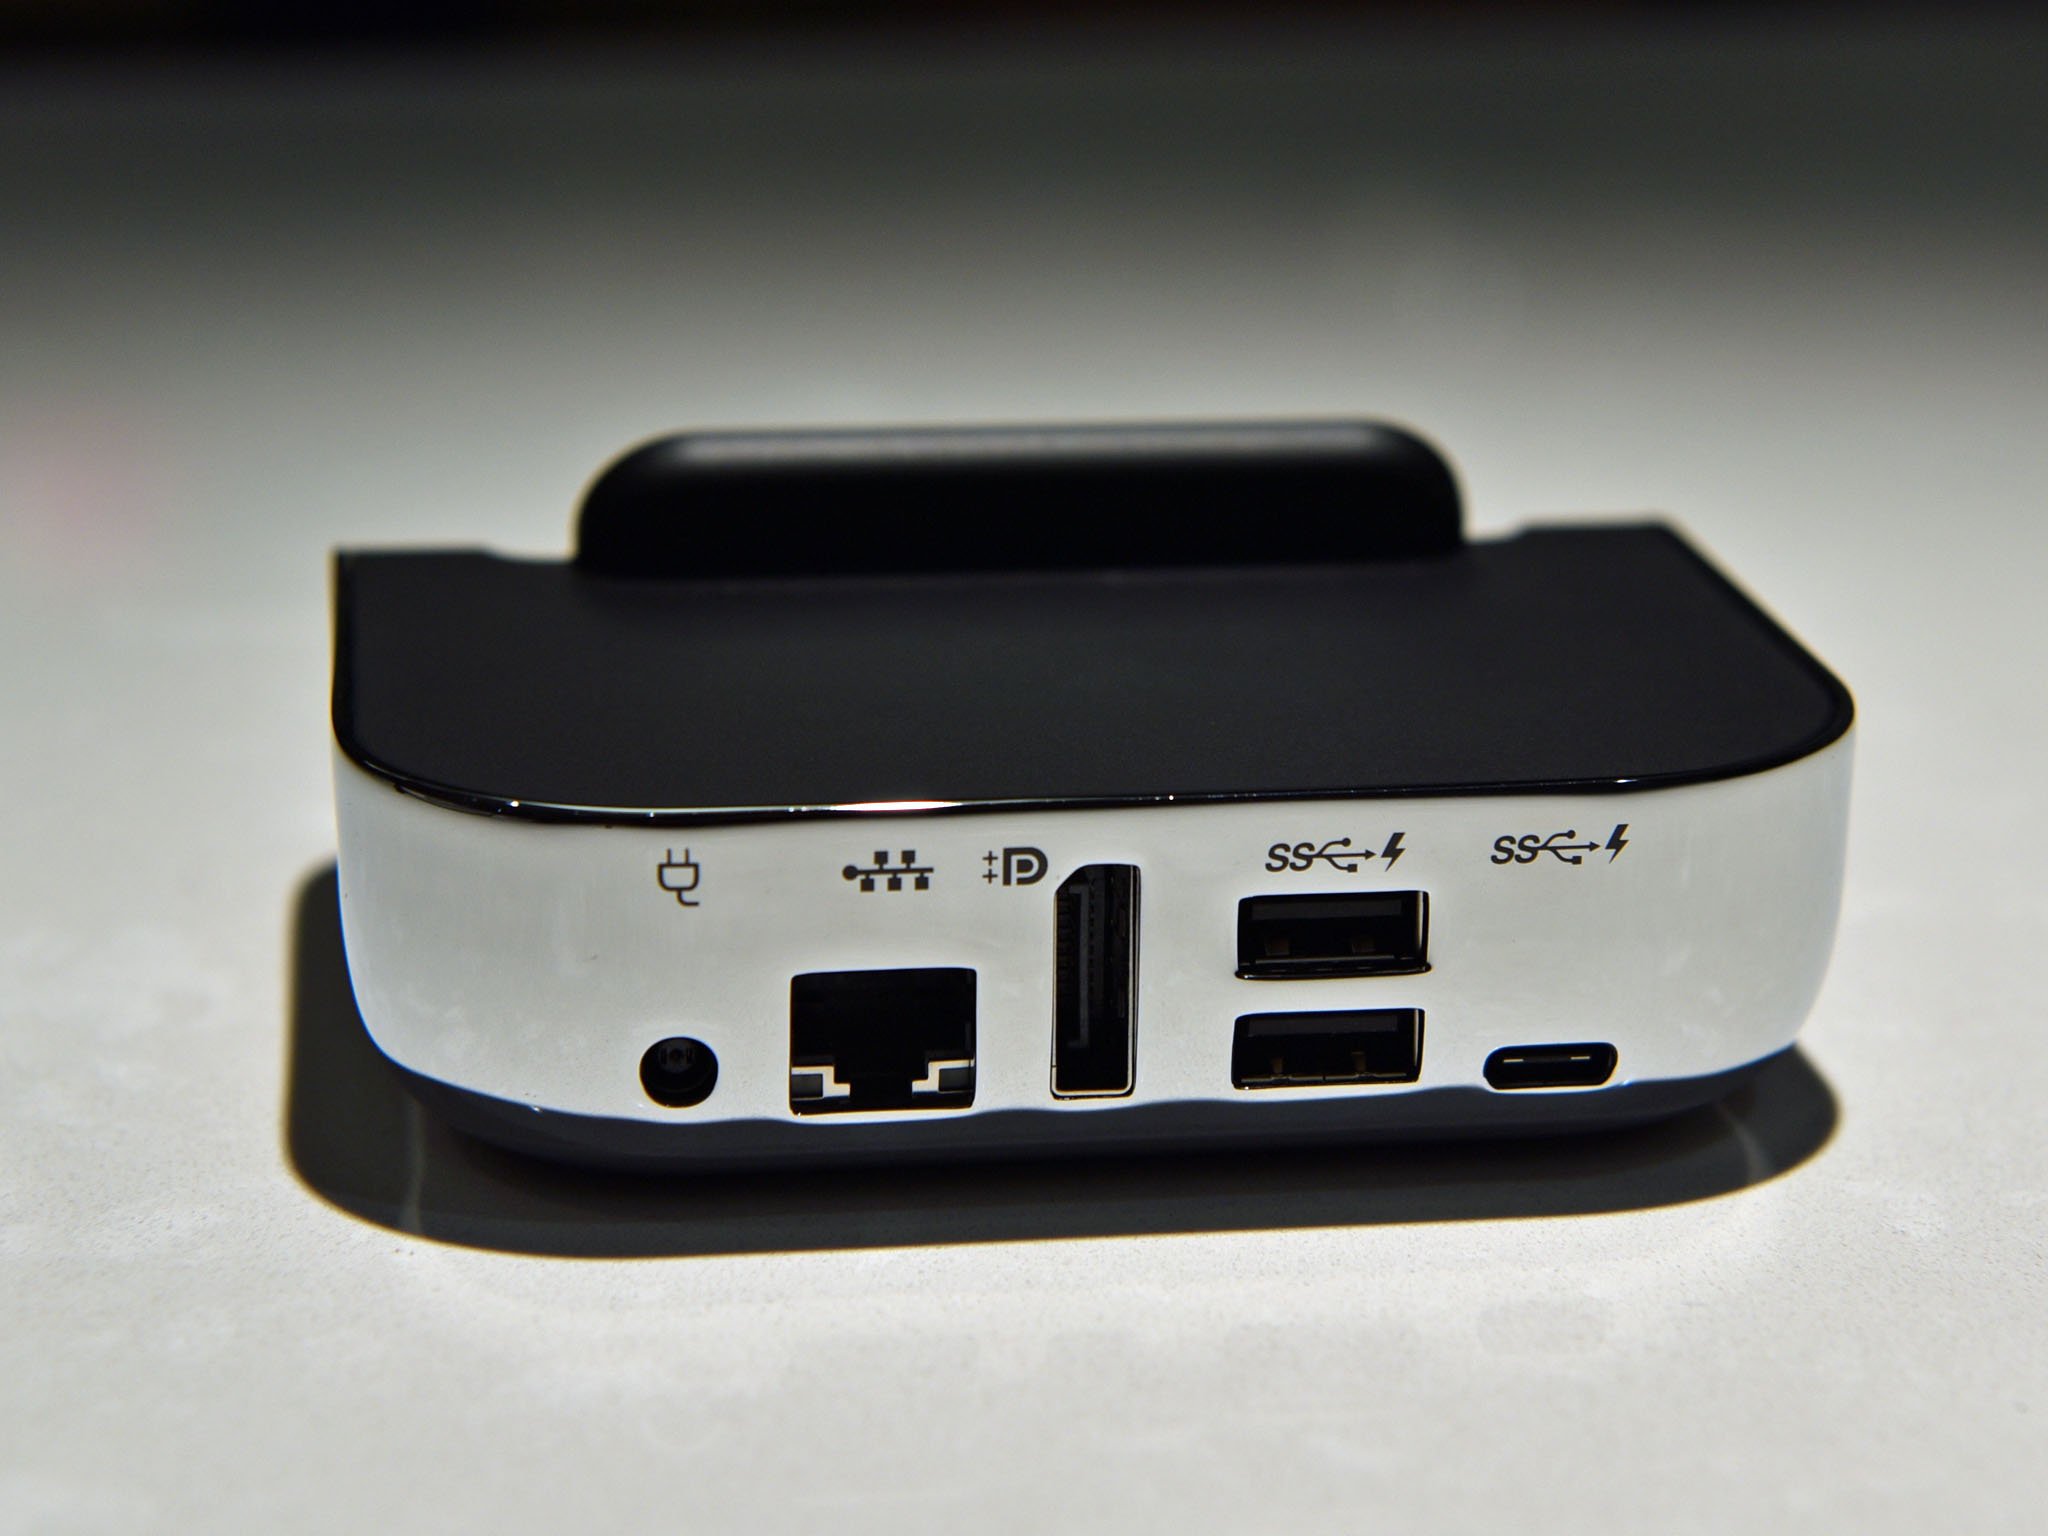 The HP Elite x3 Desk Dock works with any Continuum device — Lumia 